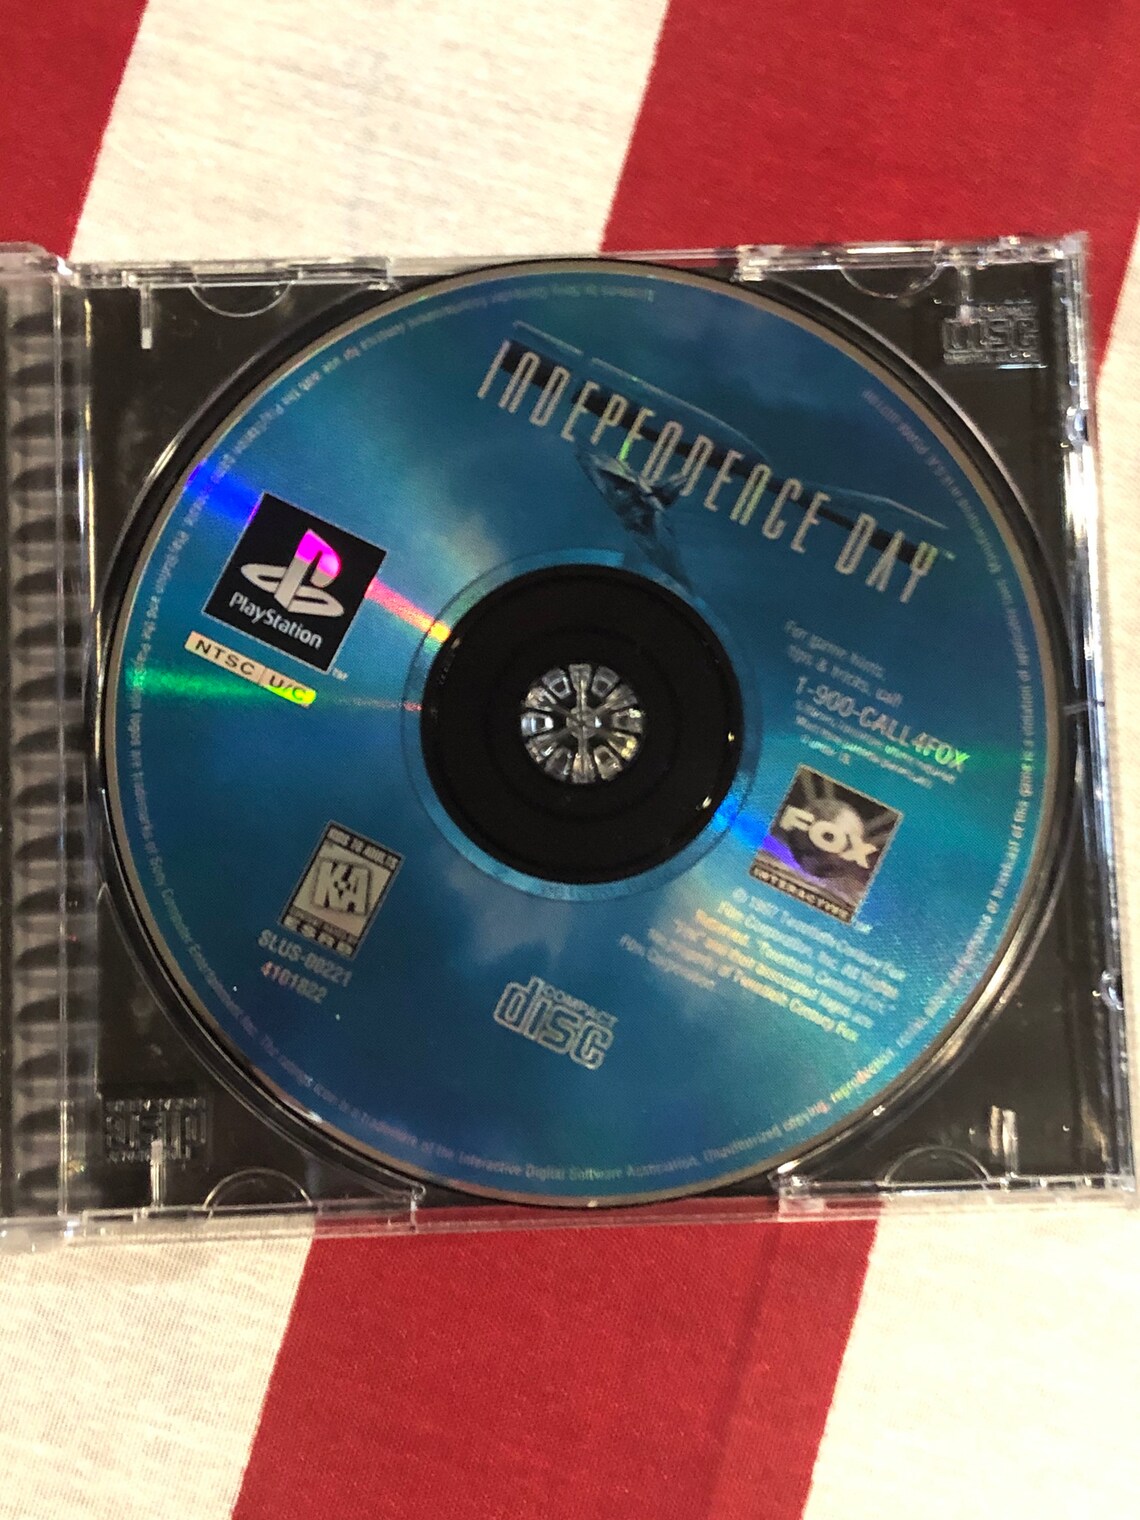 Independence Day Playstation Game PS1 Used Complete | Etsy